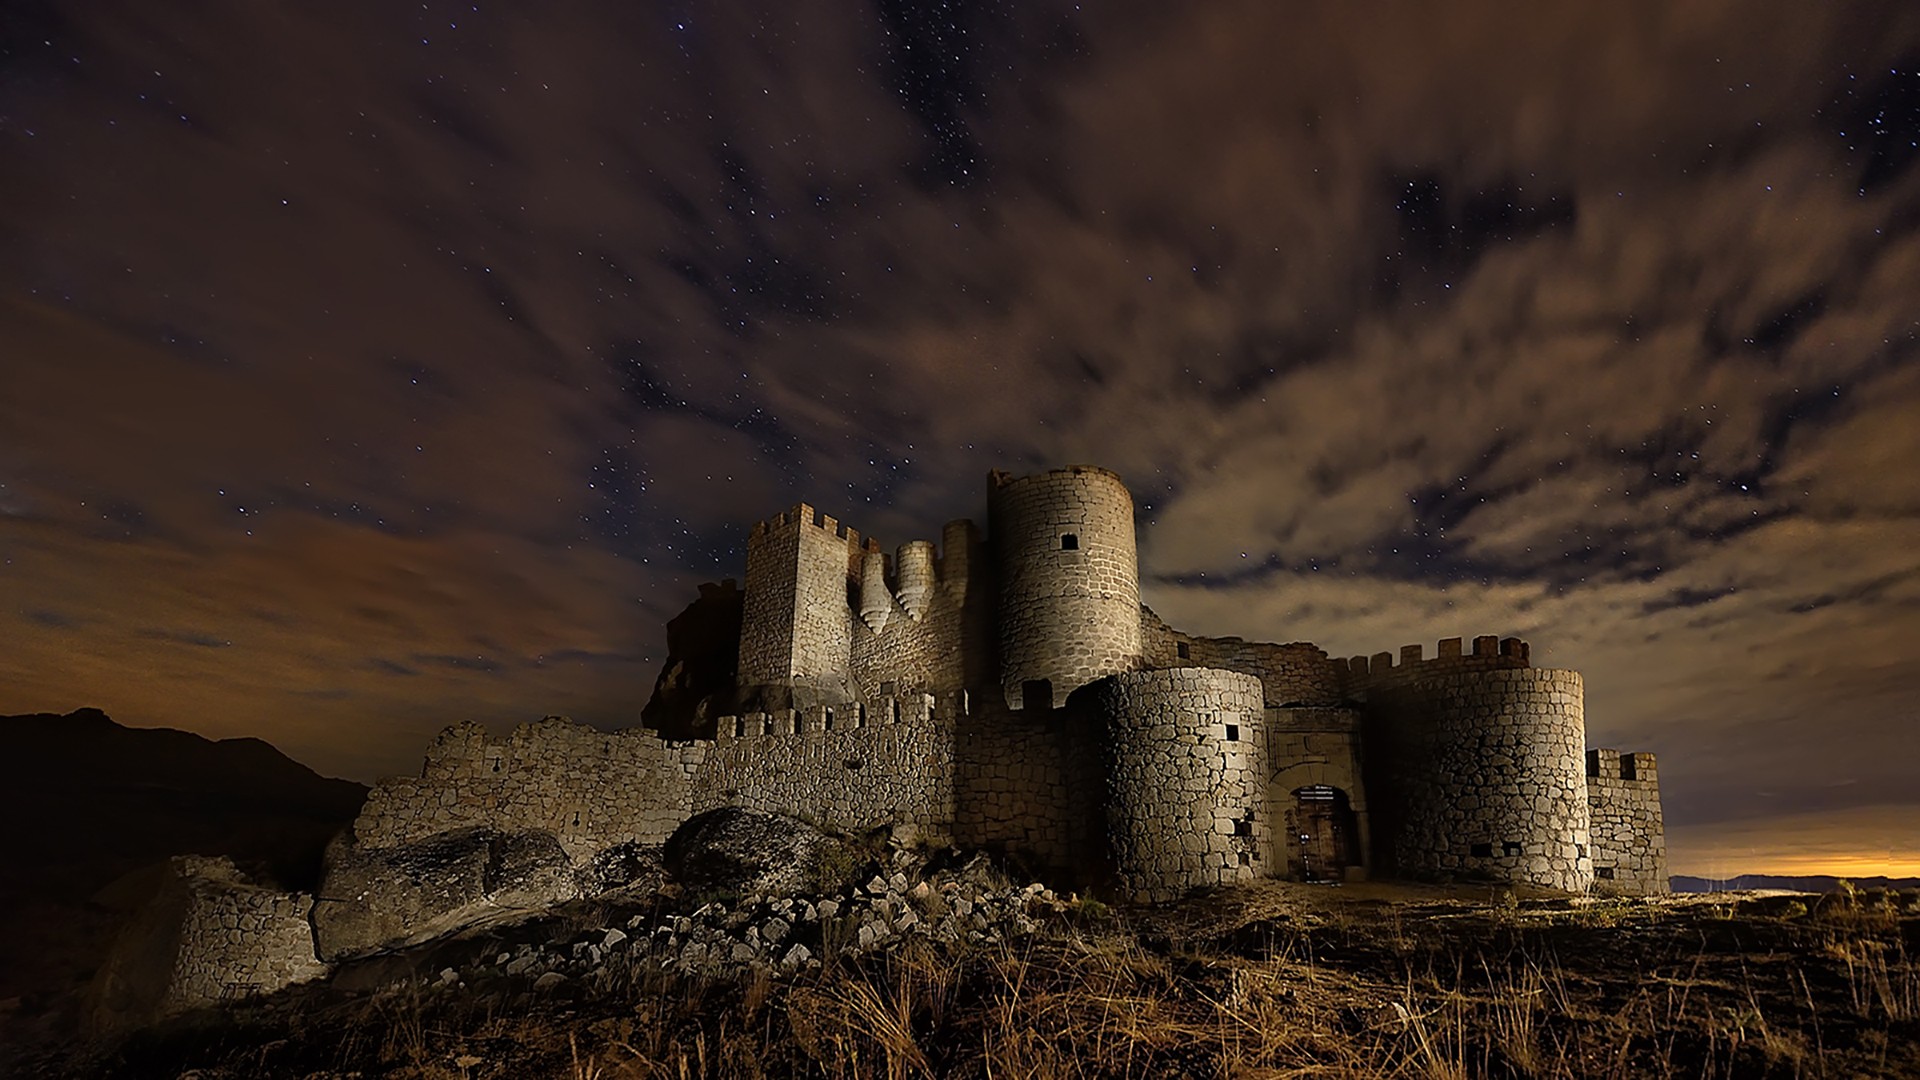 General 1920x1080 architecture castle ancient clouds ruins plants night stars stones long exposure